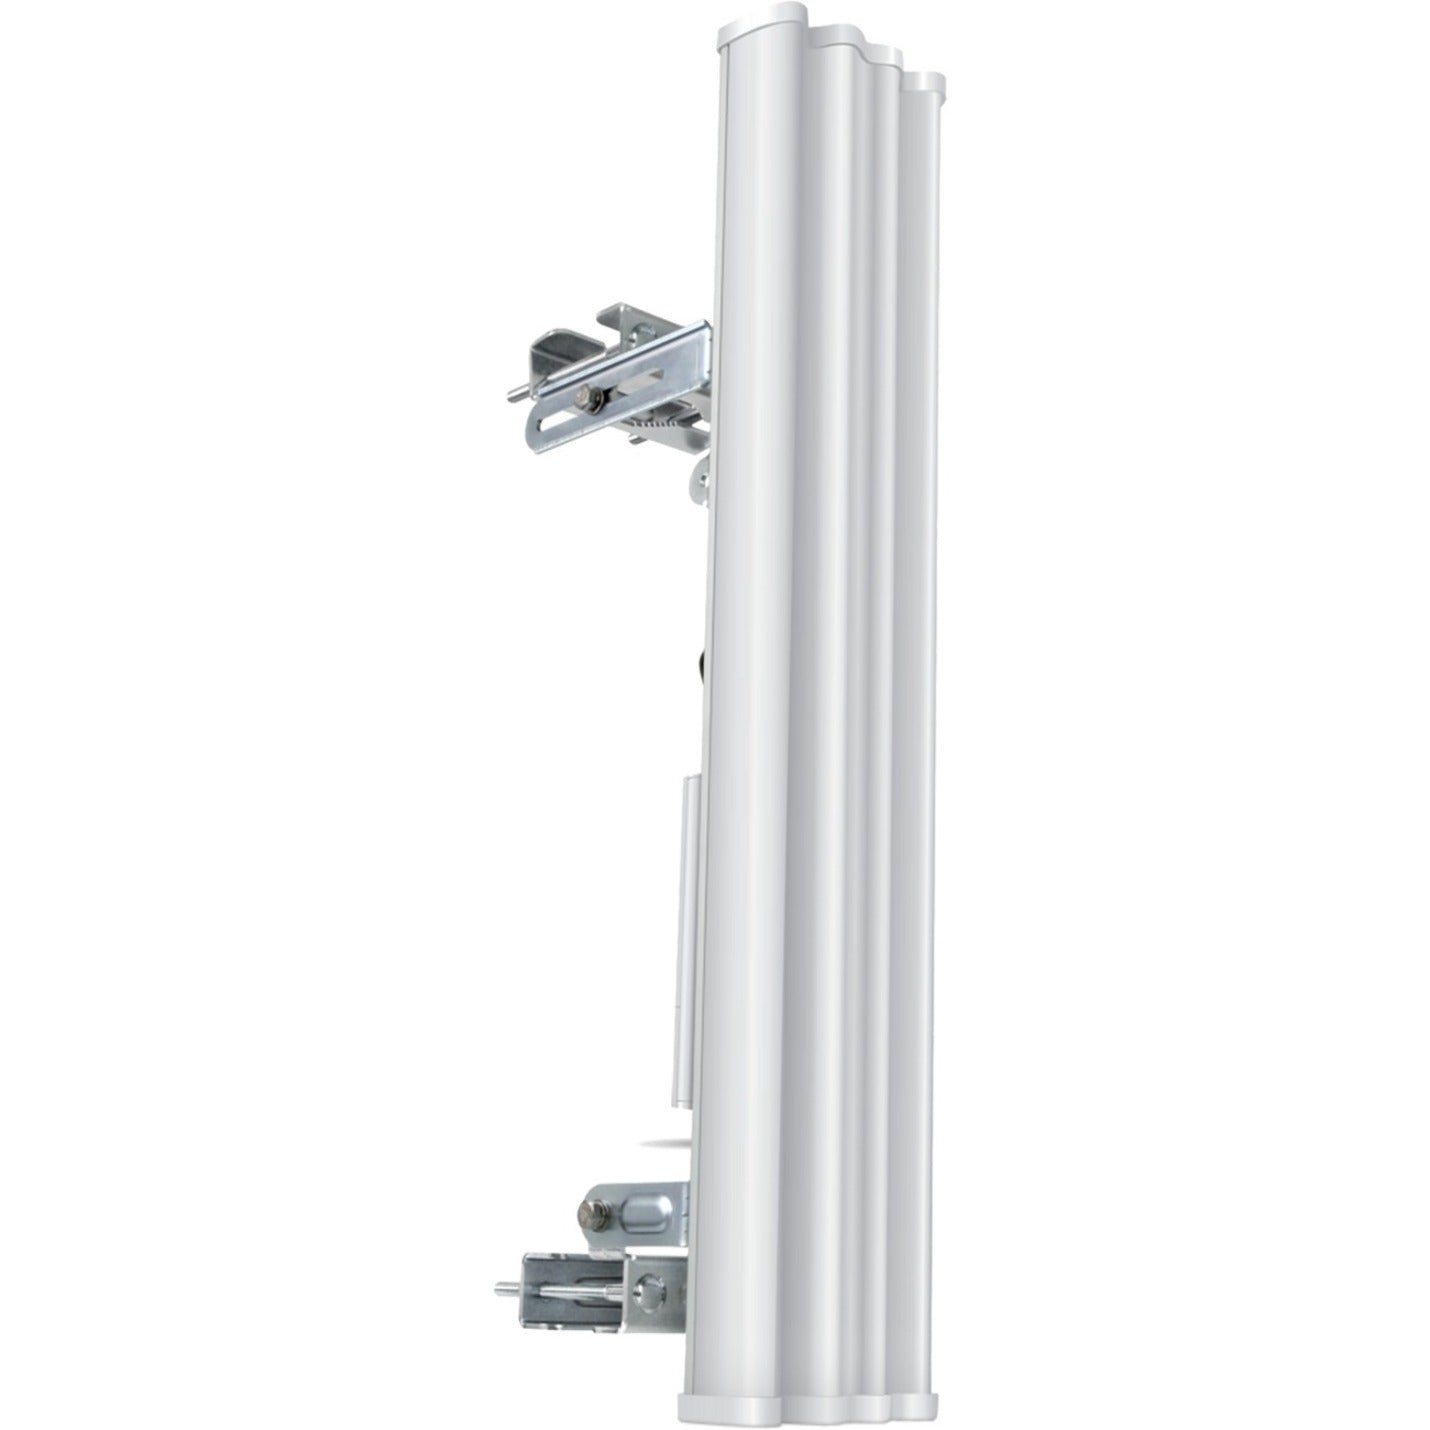 Ubiquiti AM-5G20-90 2x2 MIMO BaseStation Sector Antenna, Dual Linear Polarization, 5.15 GHz to 5.85 GHz Frequency Range